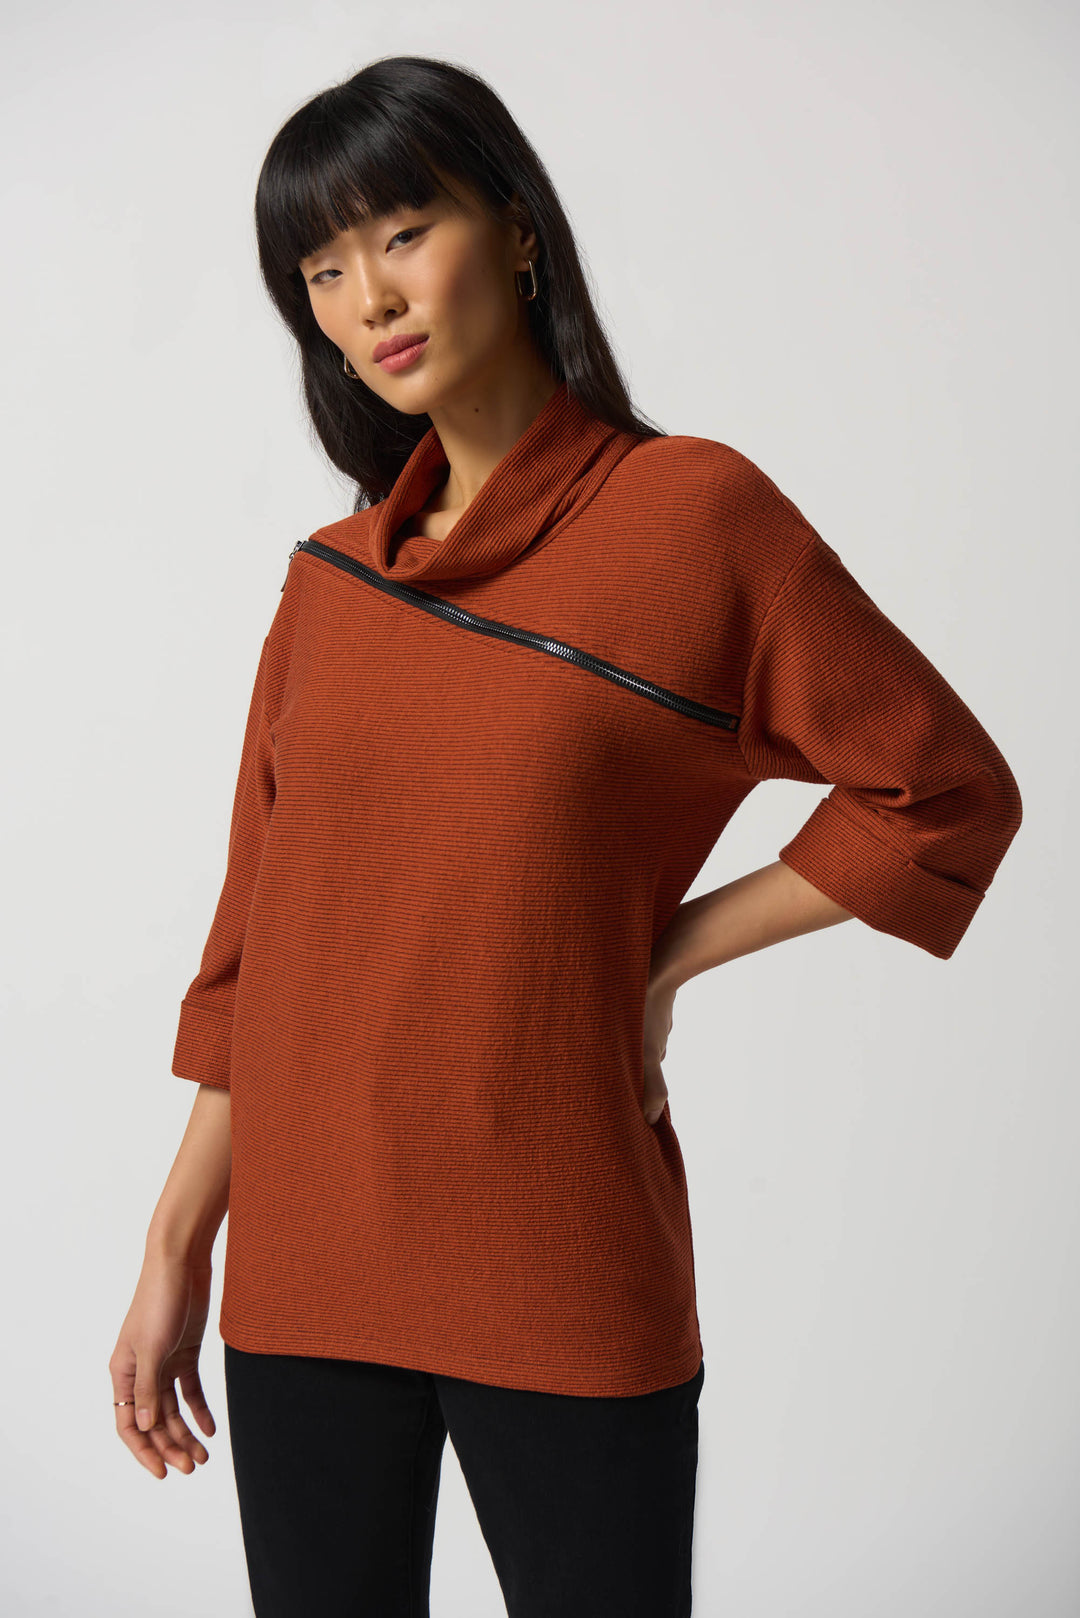 The cowl neck and 3/4 sleeves create an elegant silhouette, while the diagonally placed zipper lends a unique edge to this piece.